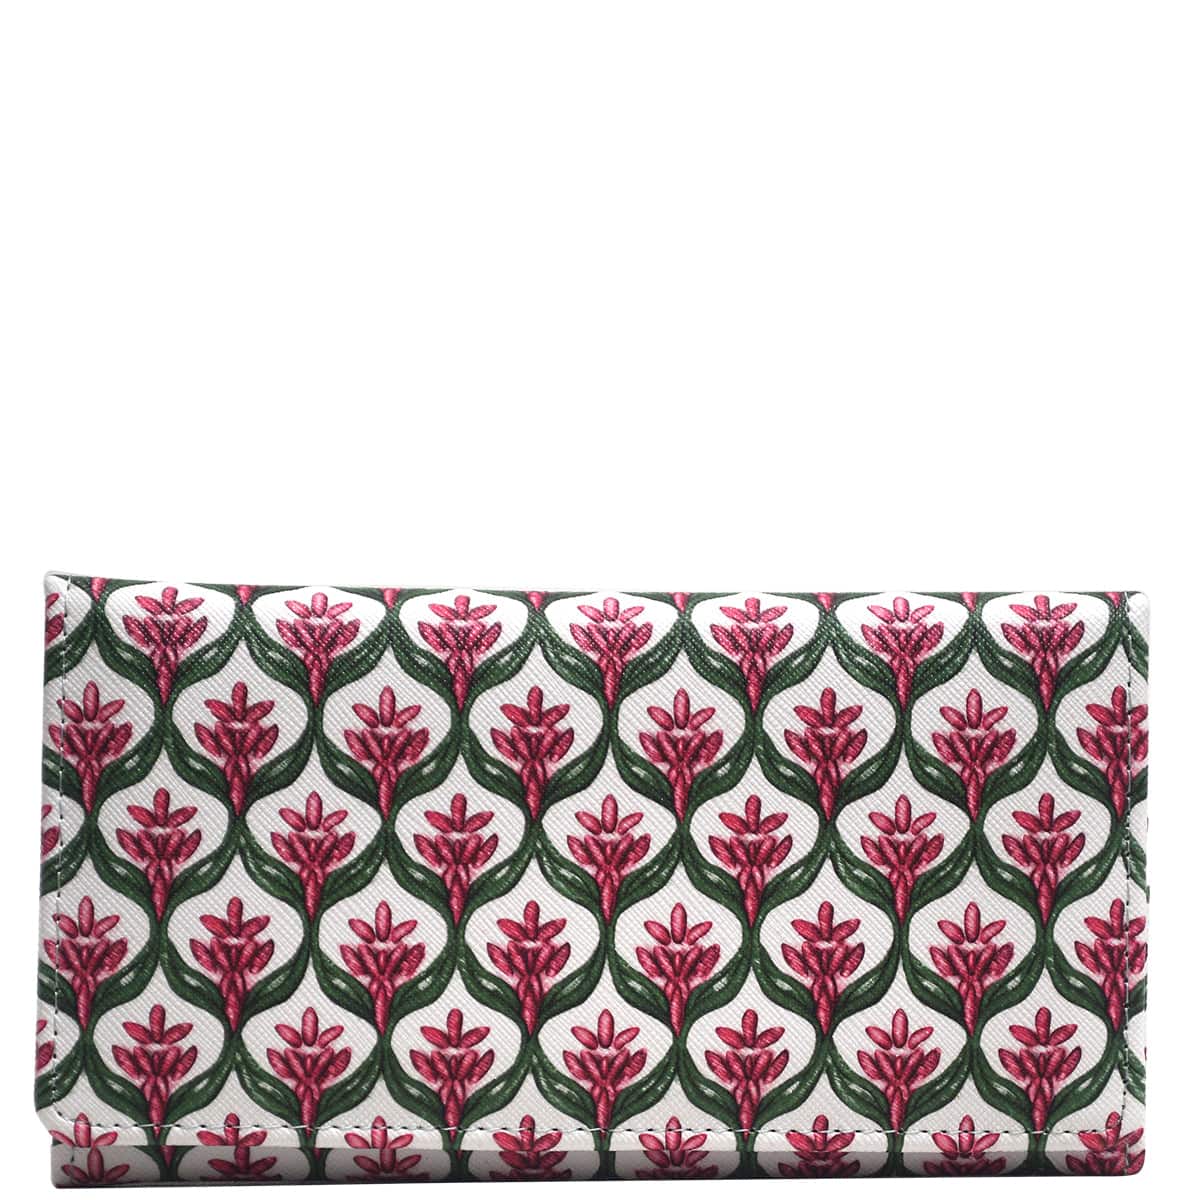 Wider Window Wallet - French Chateau Green Pink - 50% off